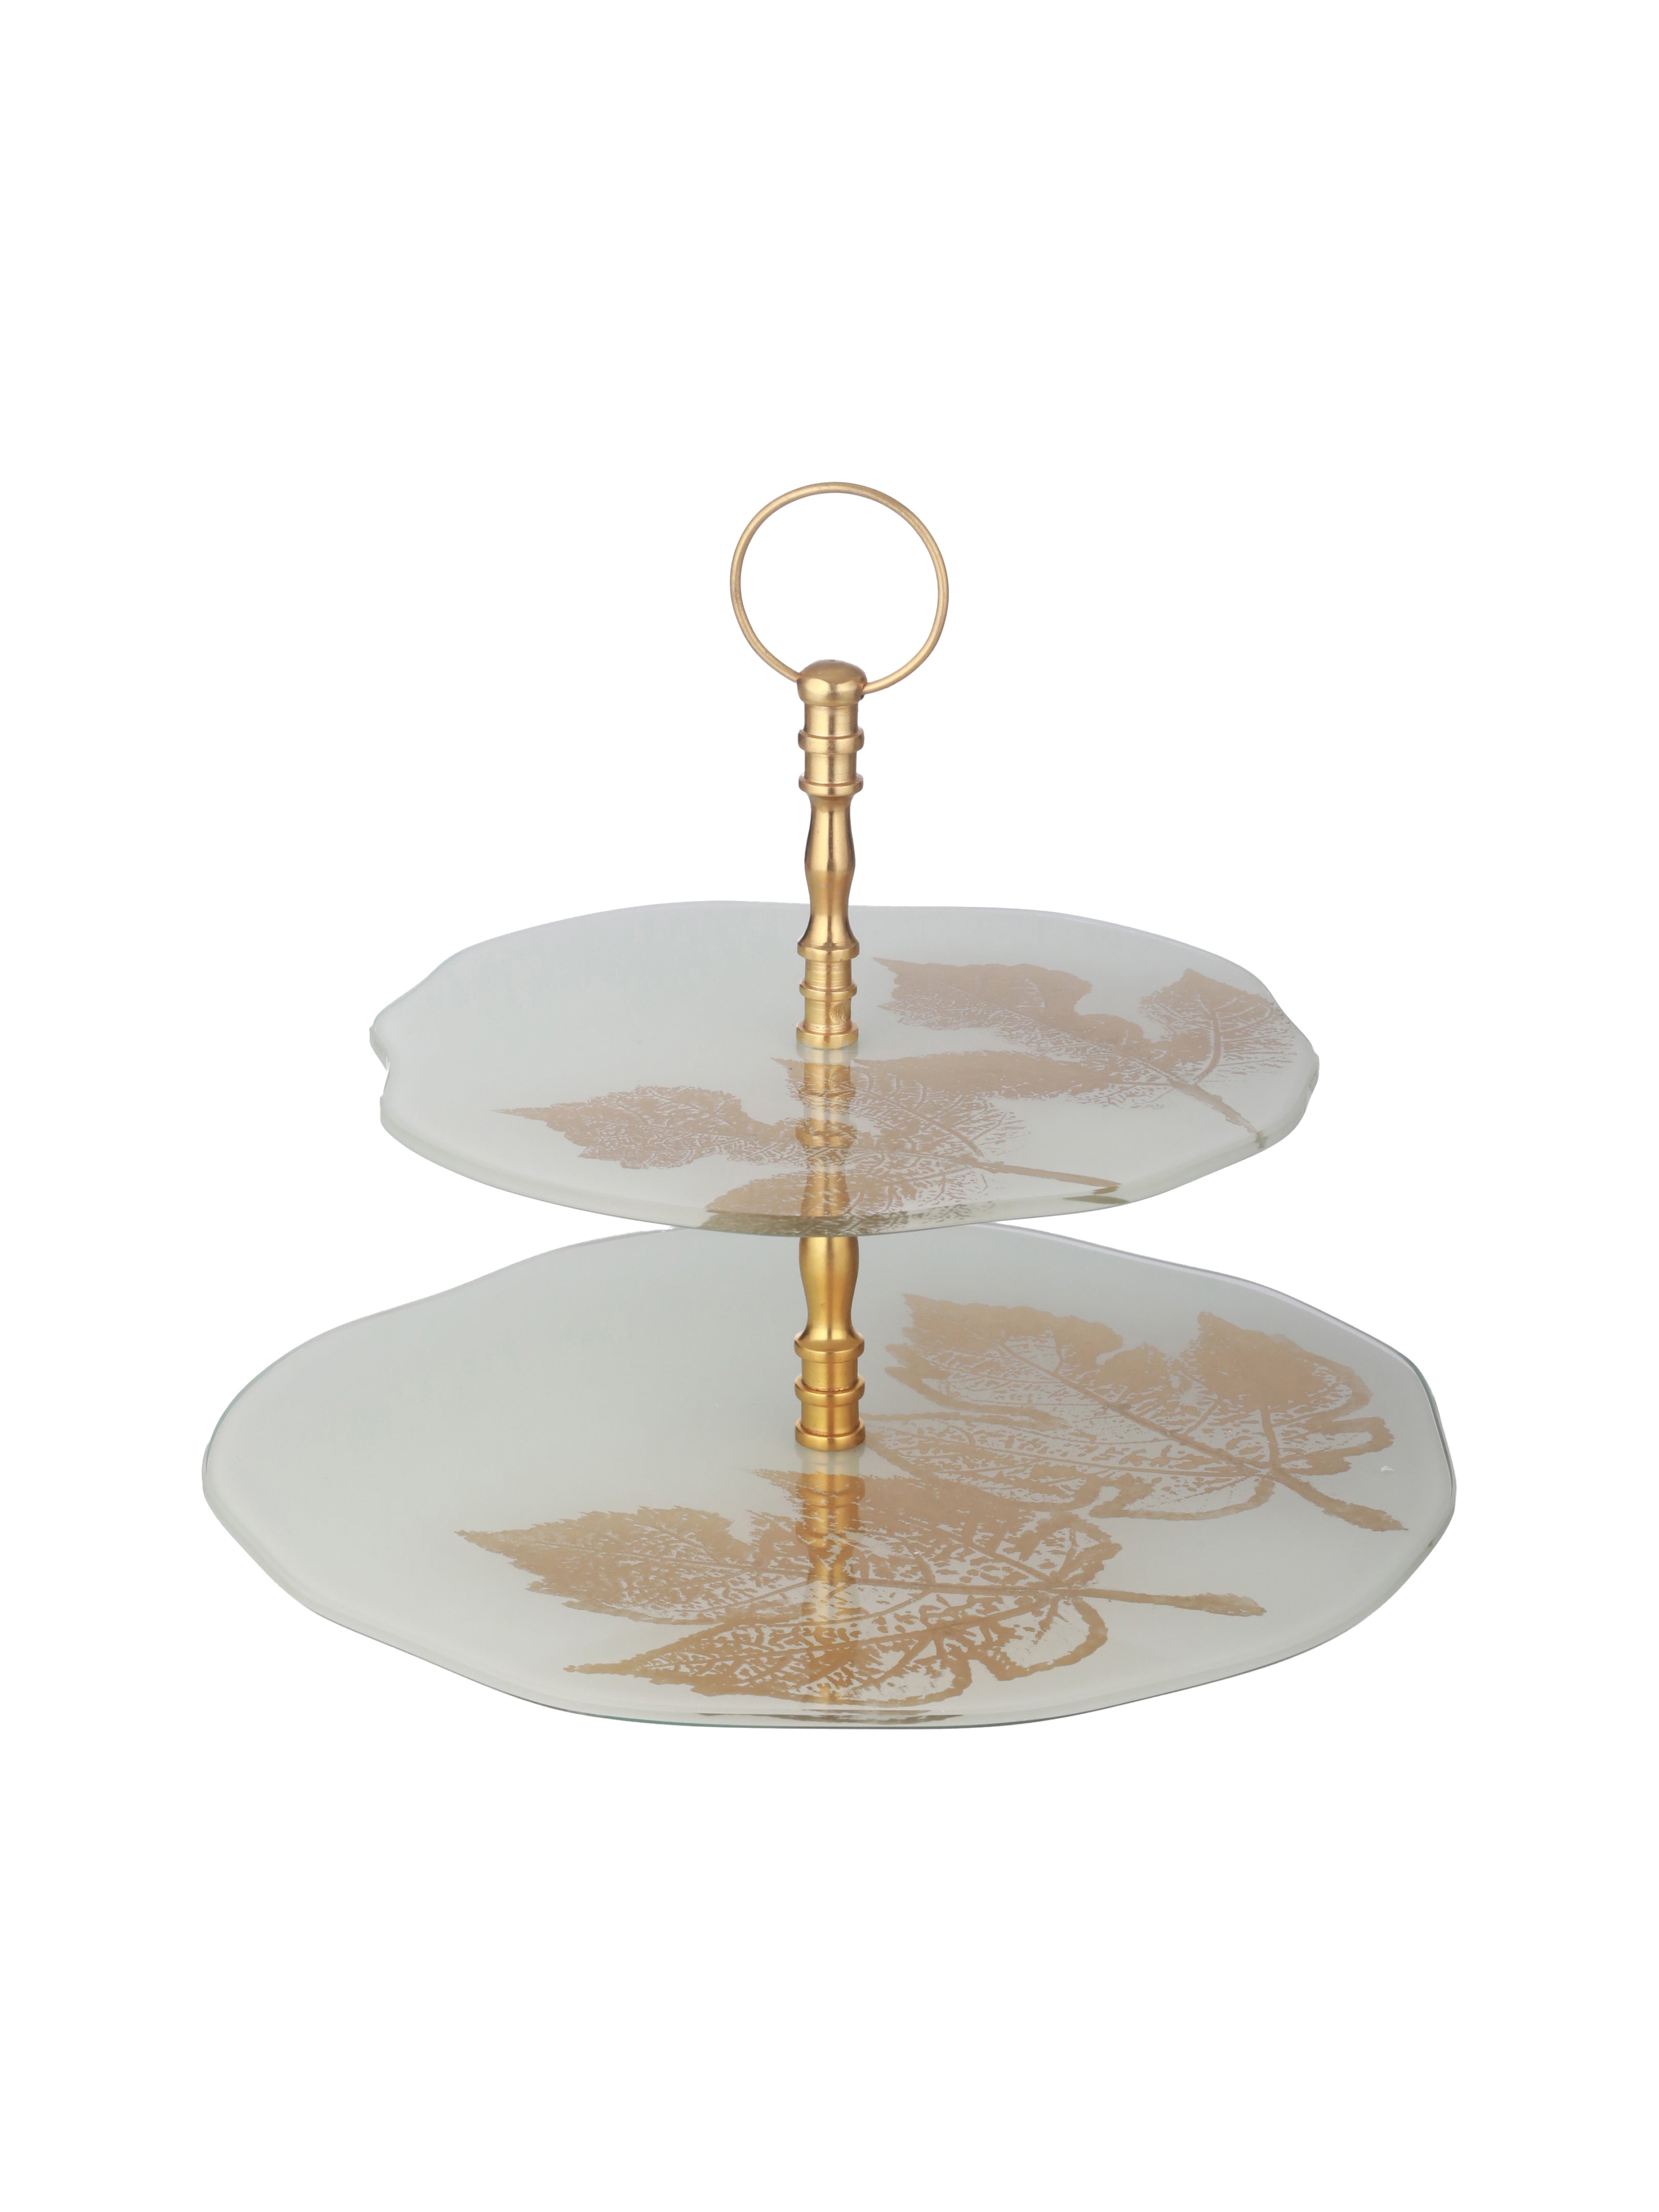 Two Tier White & Gold Cake Stand